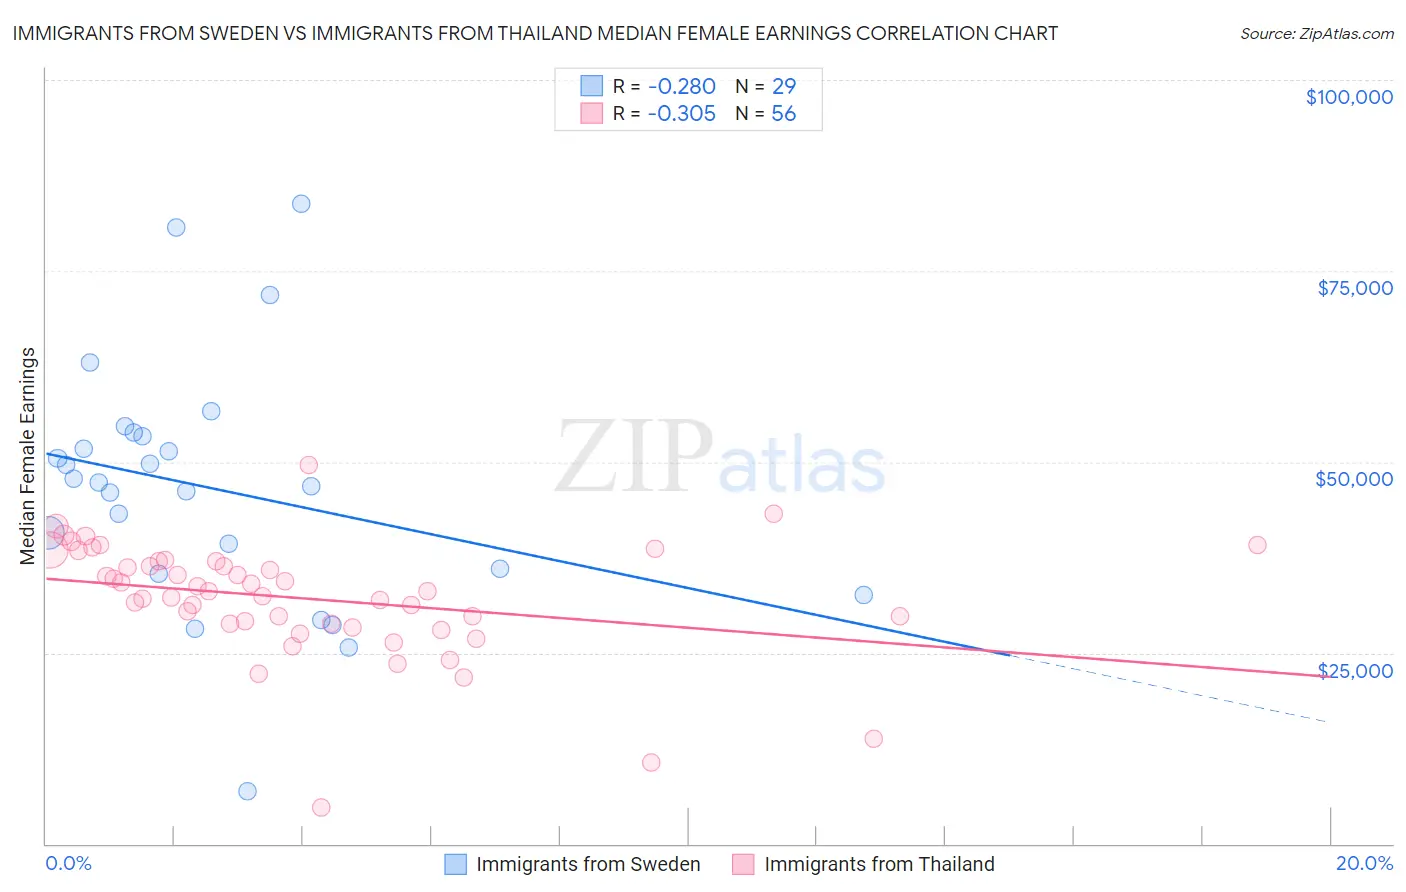 Immigrants from Sweden vs Immigrants from Thailand Median Female Earnings